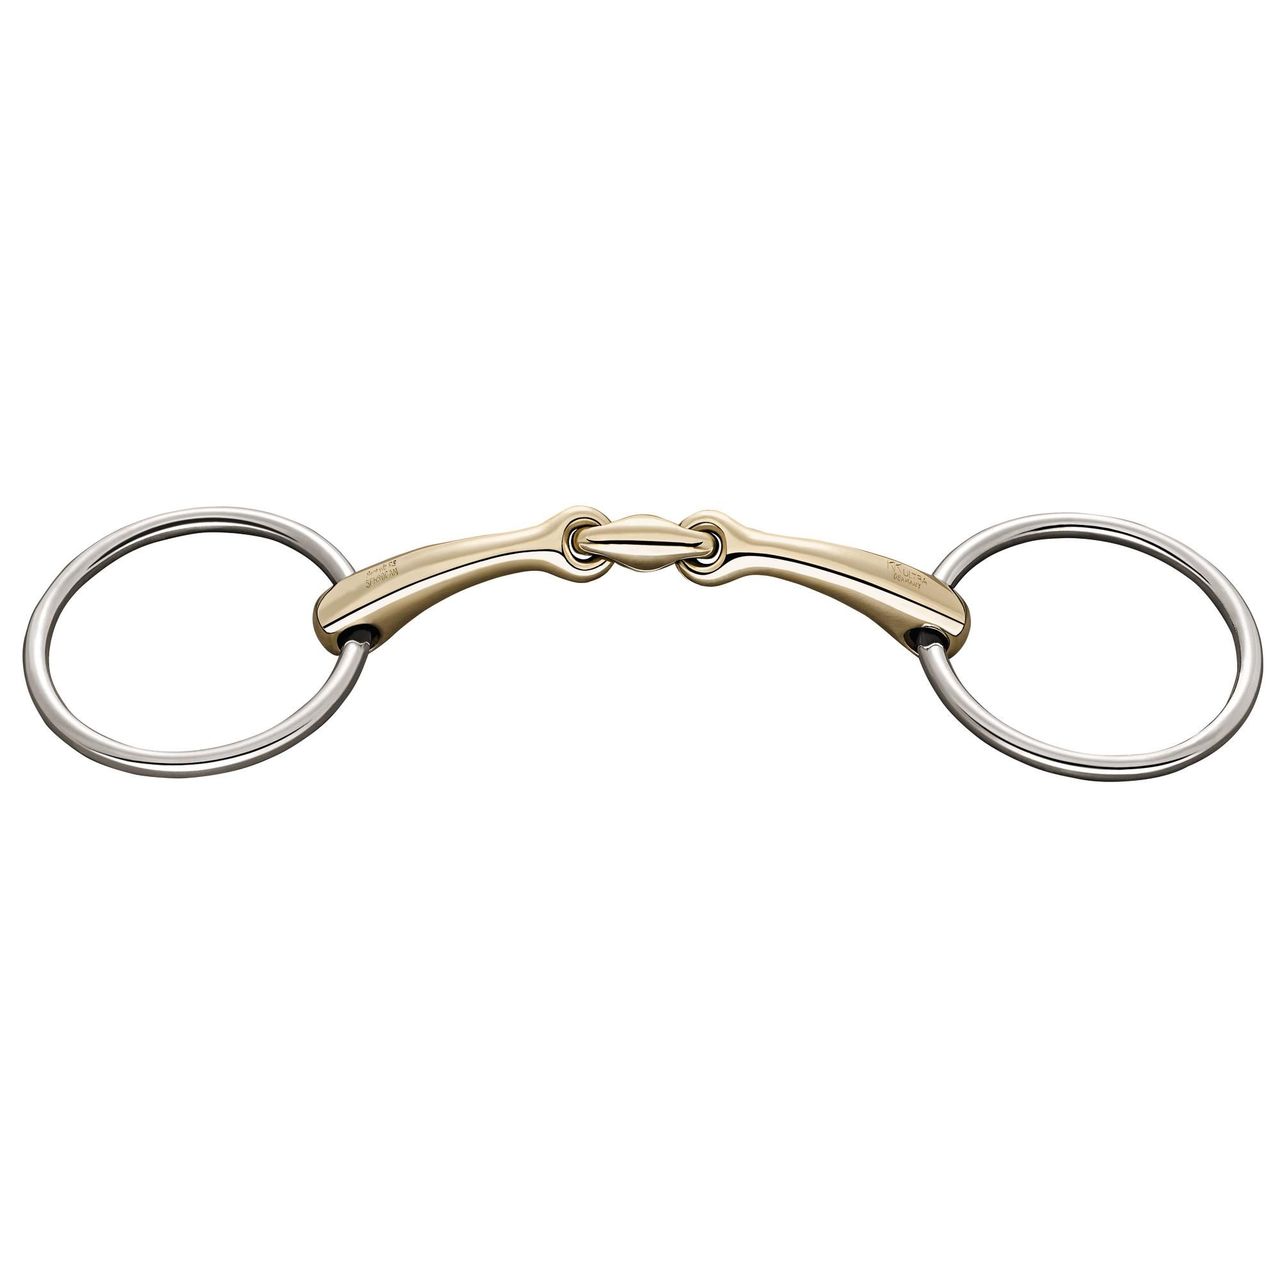 Sprenger - Dynamic RS Double Jointed Loose Ring - 16 mm